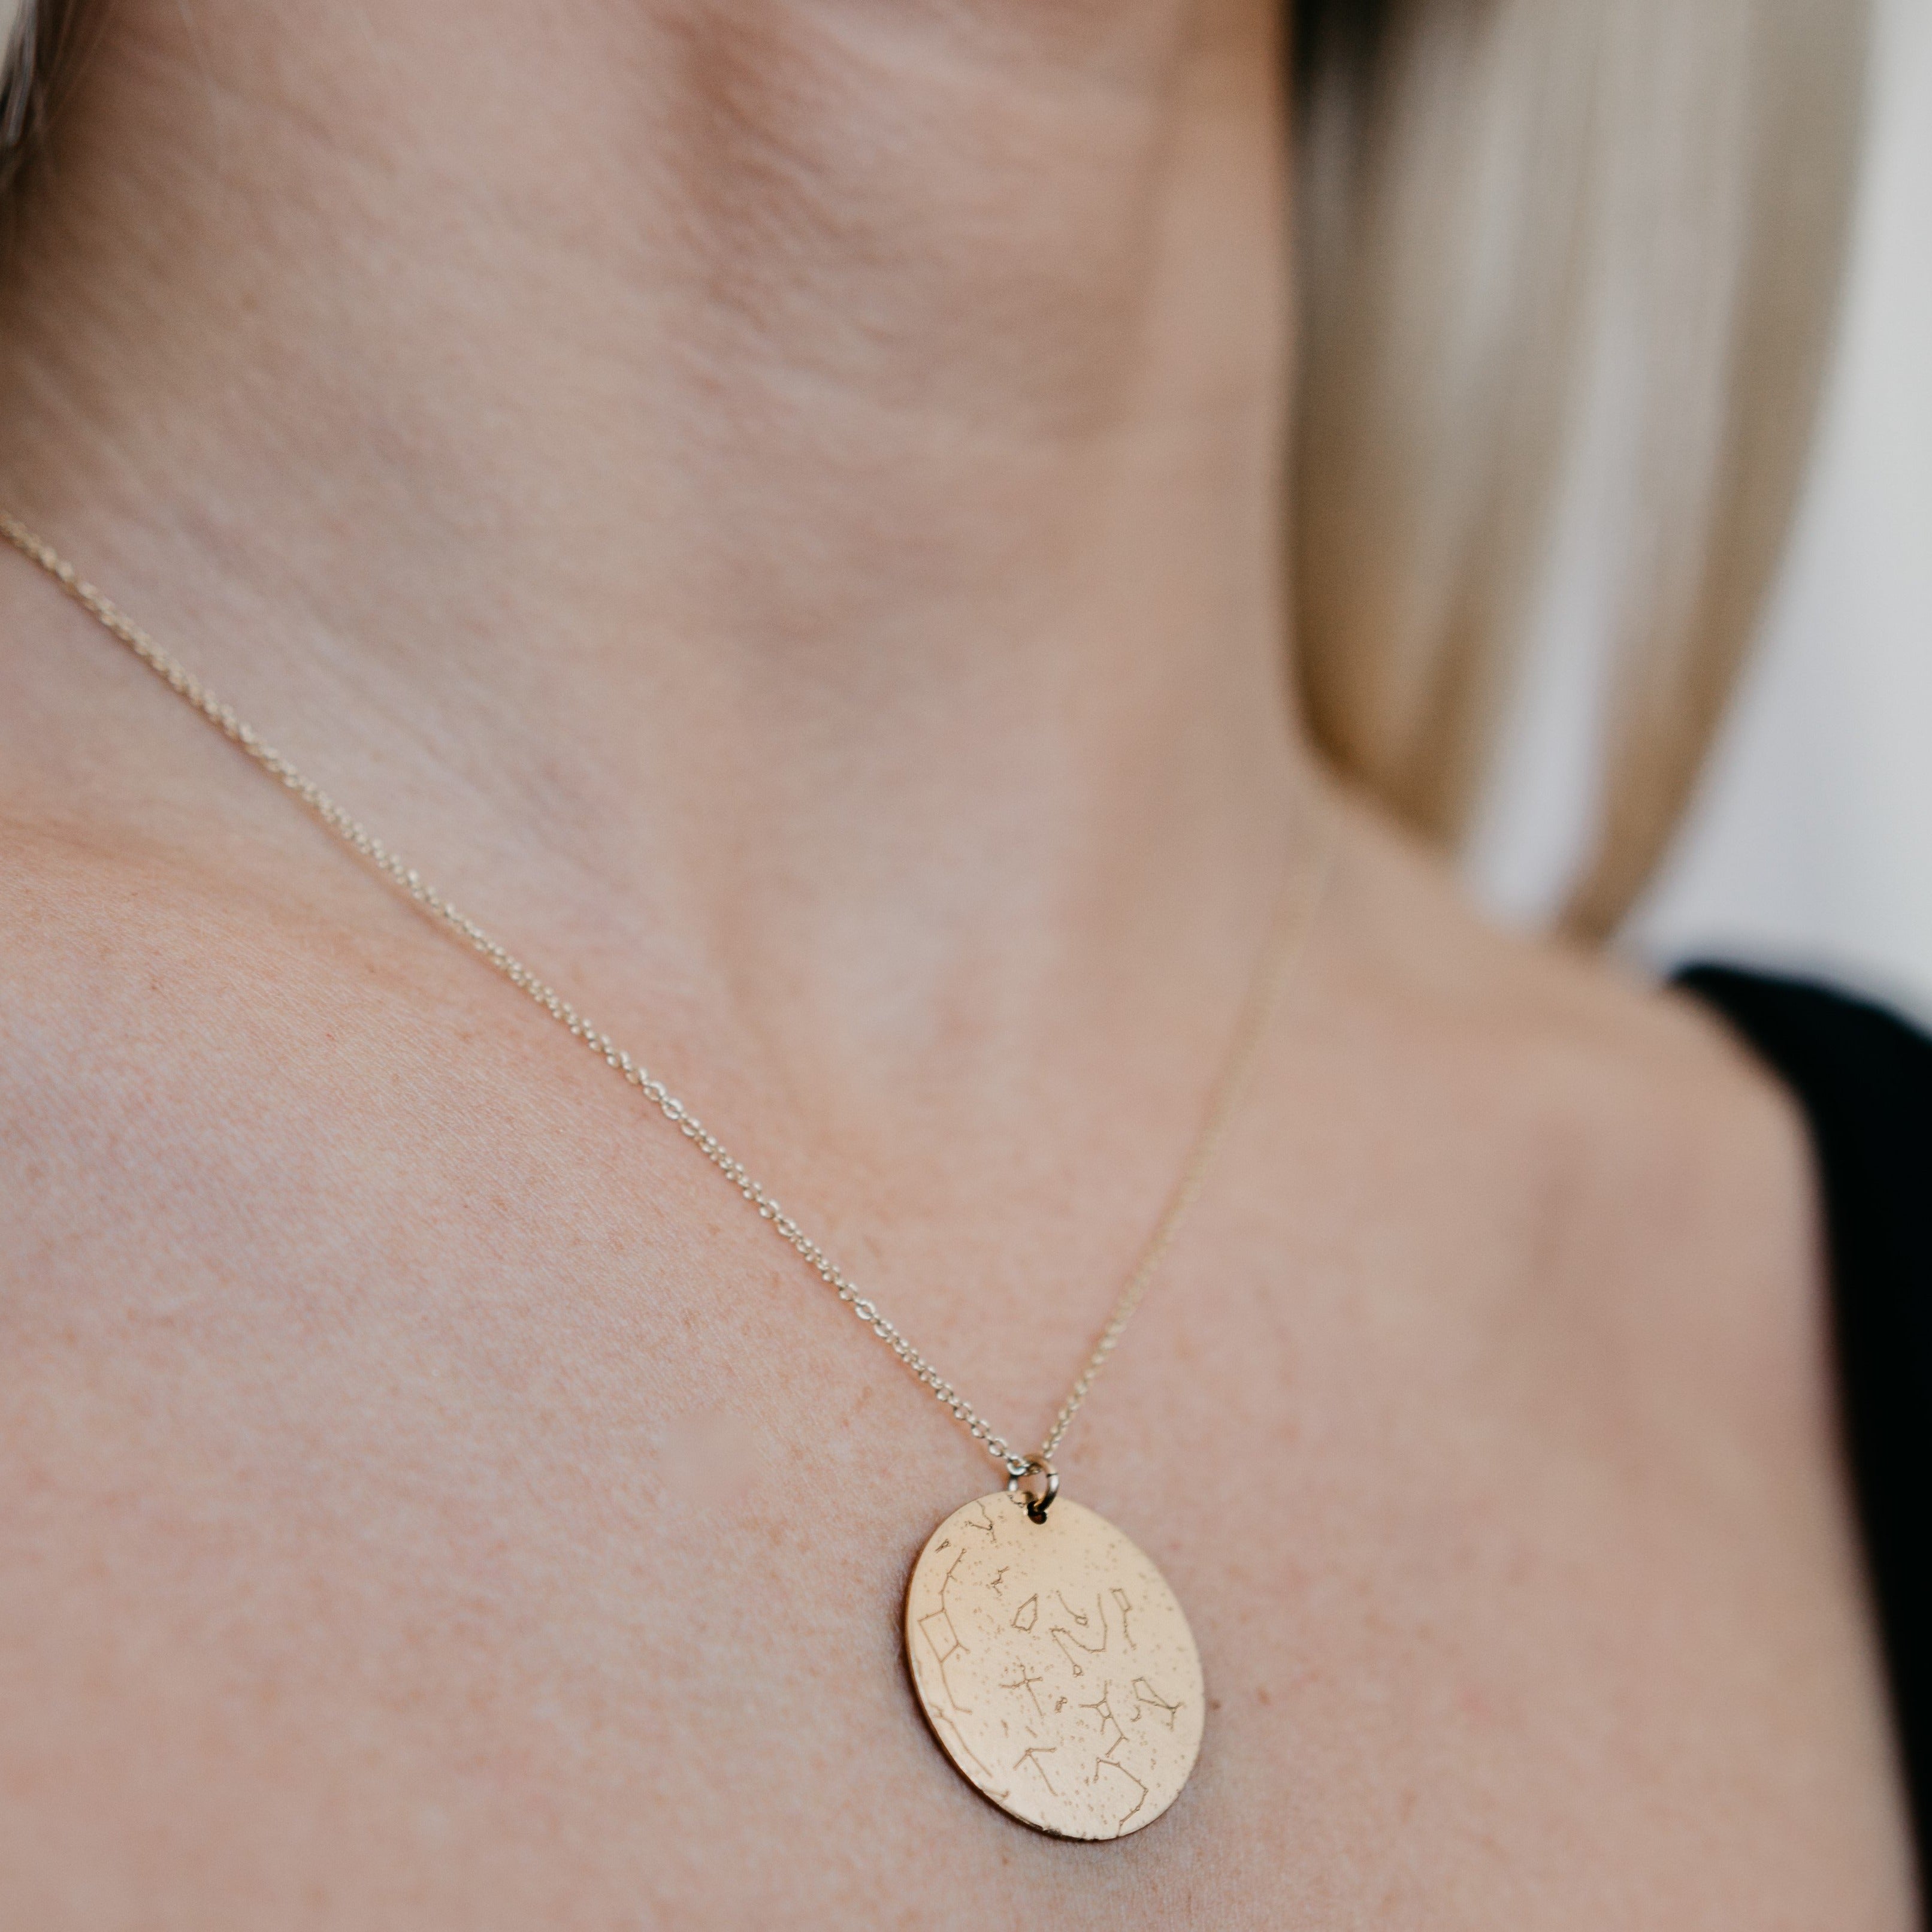 Lat & Lo star map necklace in 14K gold filled shown on models neck 